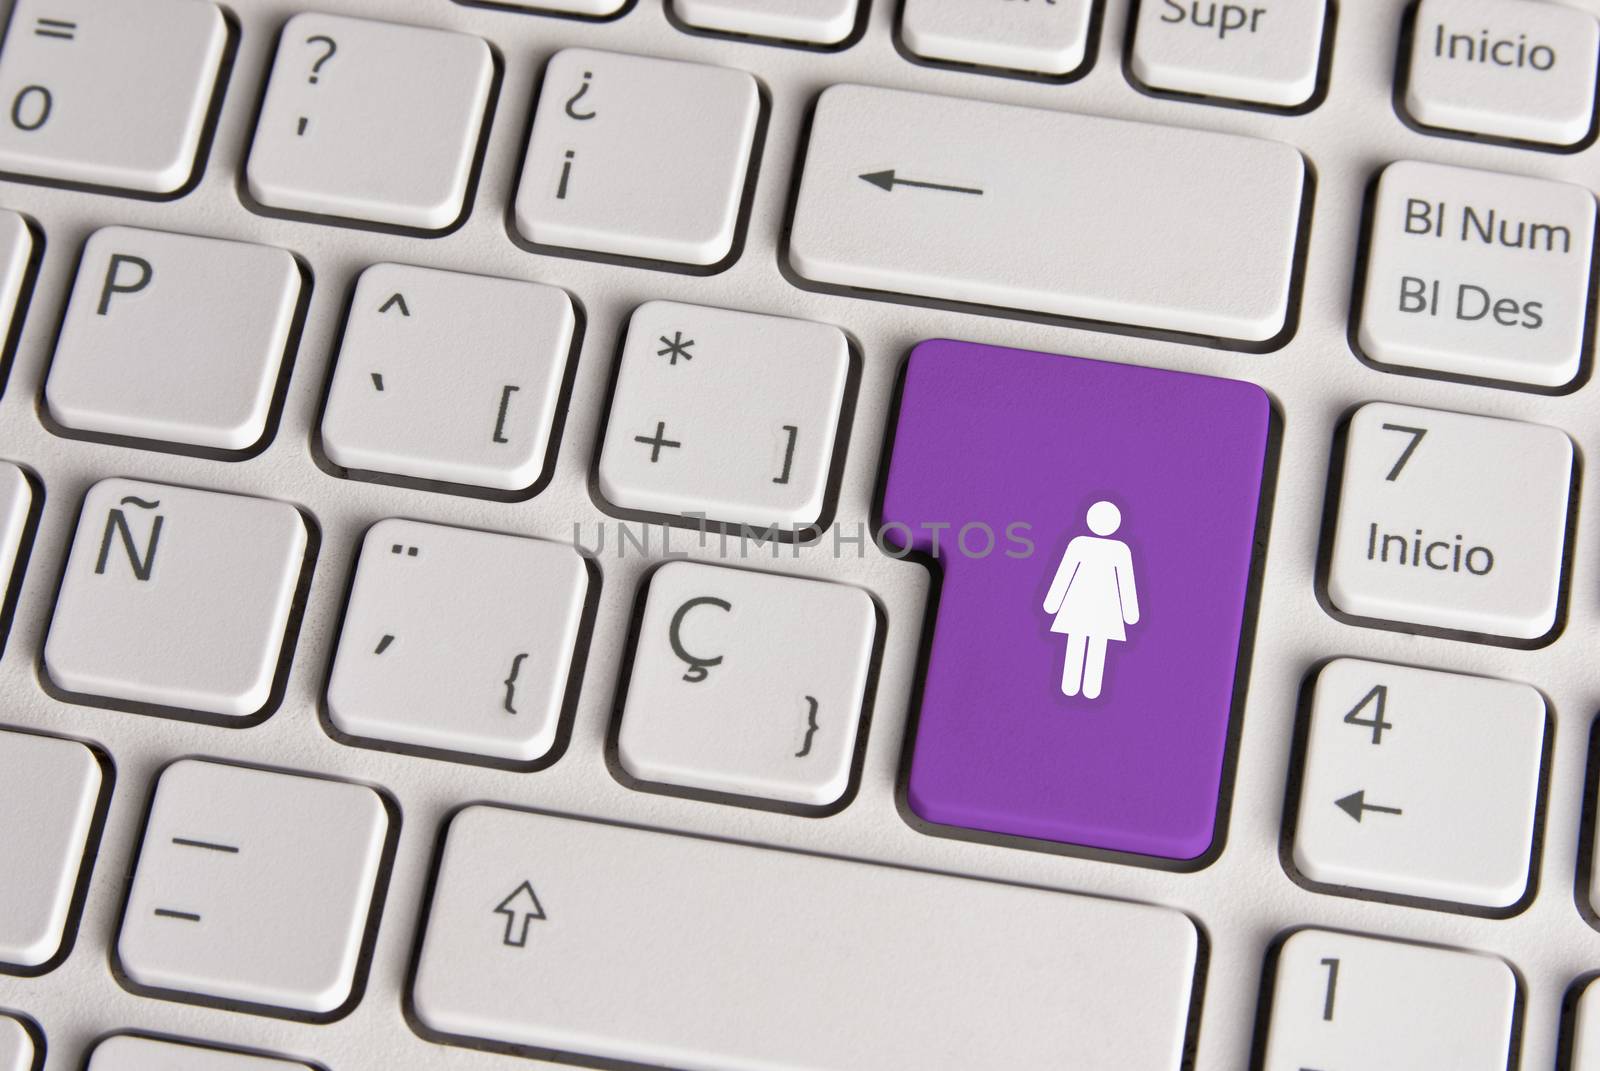 Spanish keyboard with female gender women figure icon over purple background button. Image with clipping path for easy change the key color and editing.